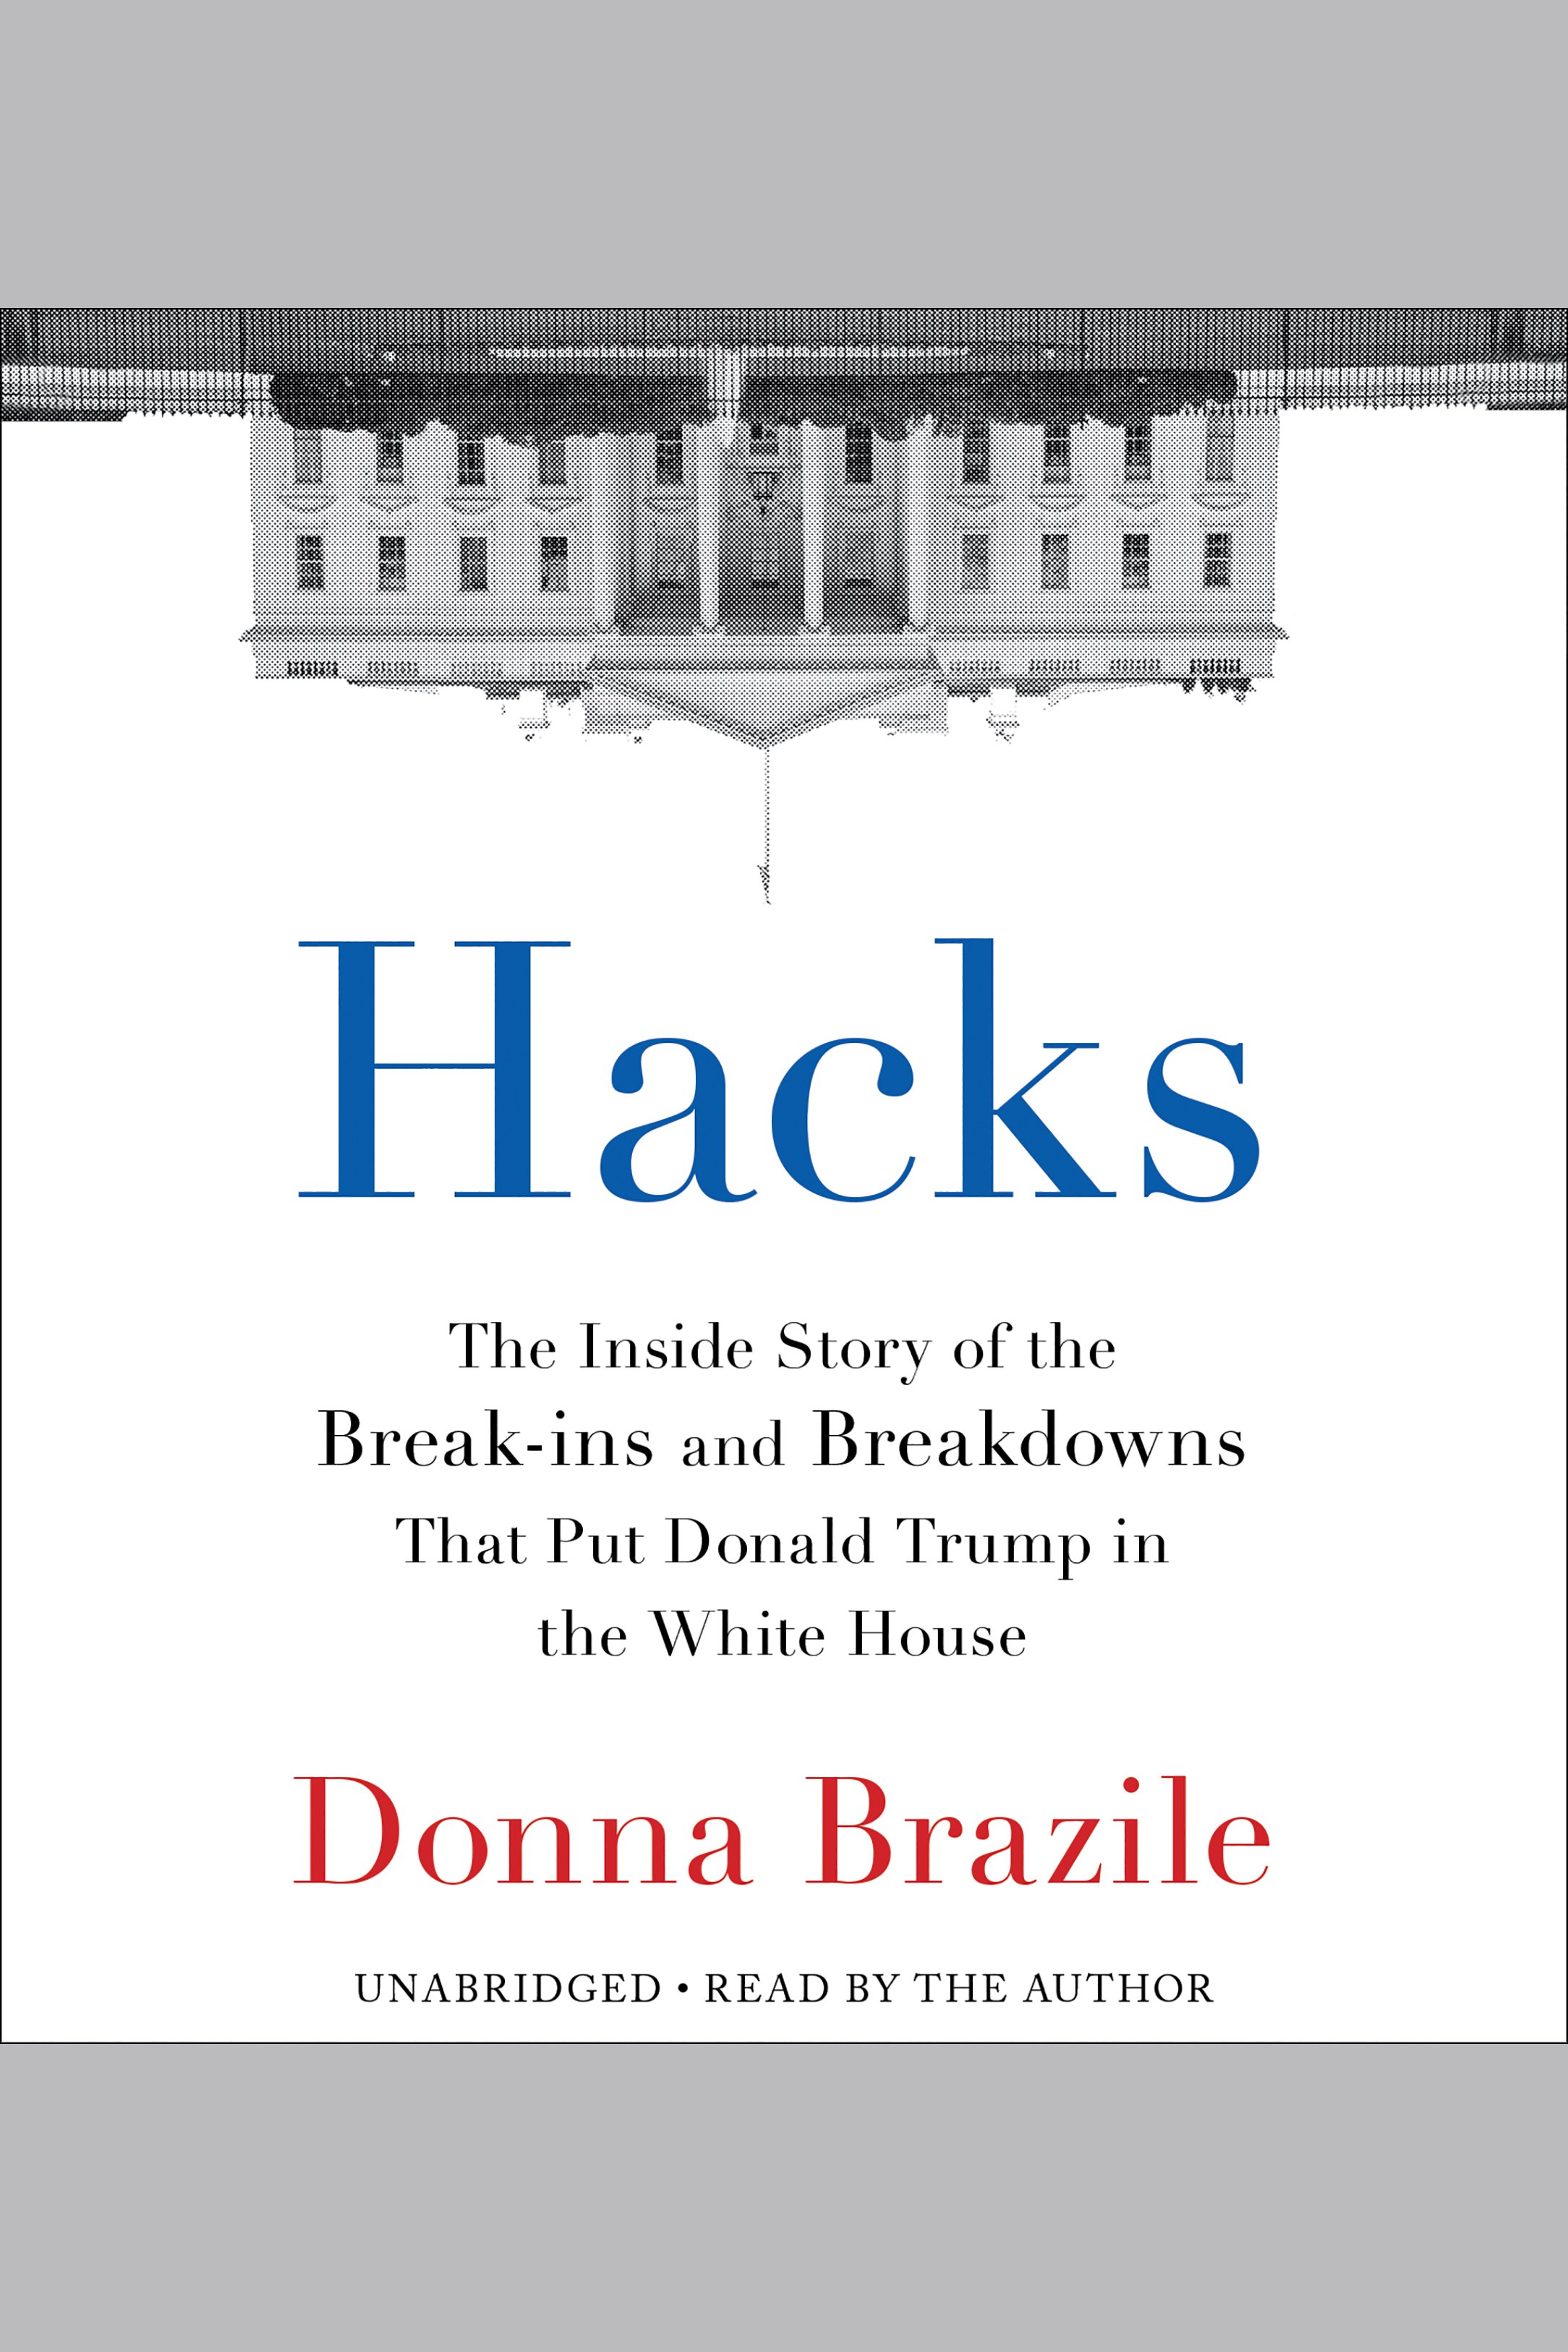 Image de couverture de Hacks [electronic resource] : The Inside Story of the Break-ins and Breakdowns That Put Donald Trump in the White House